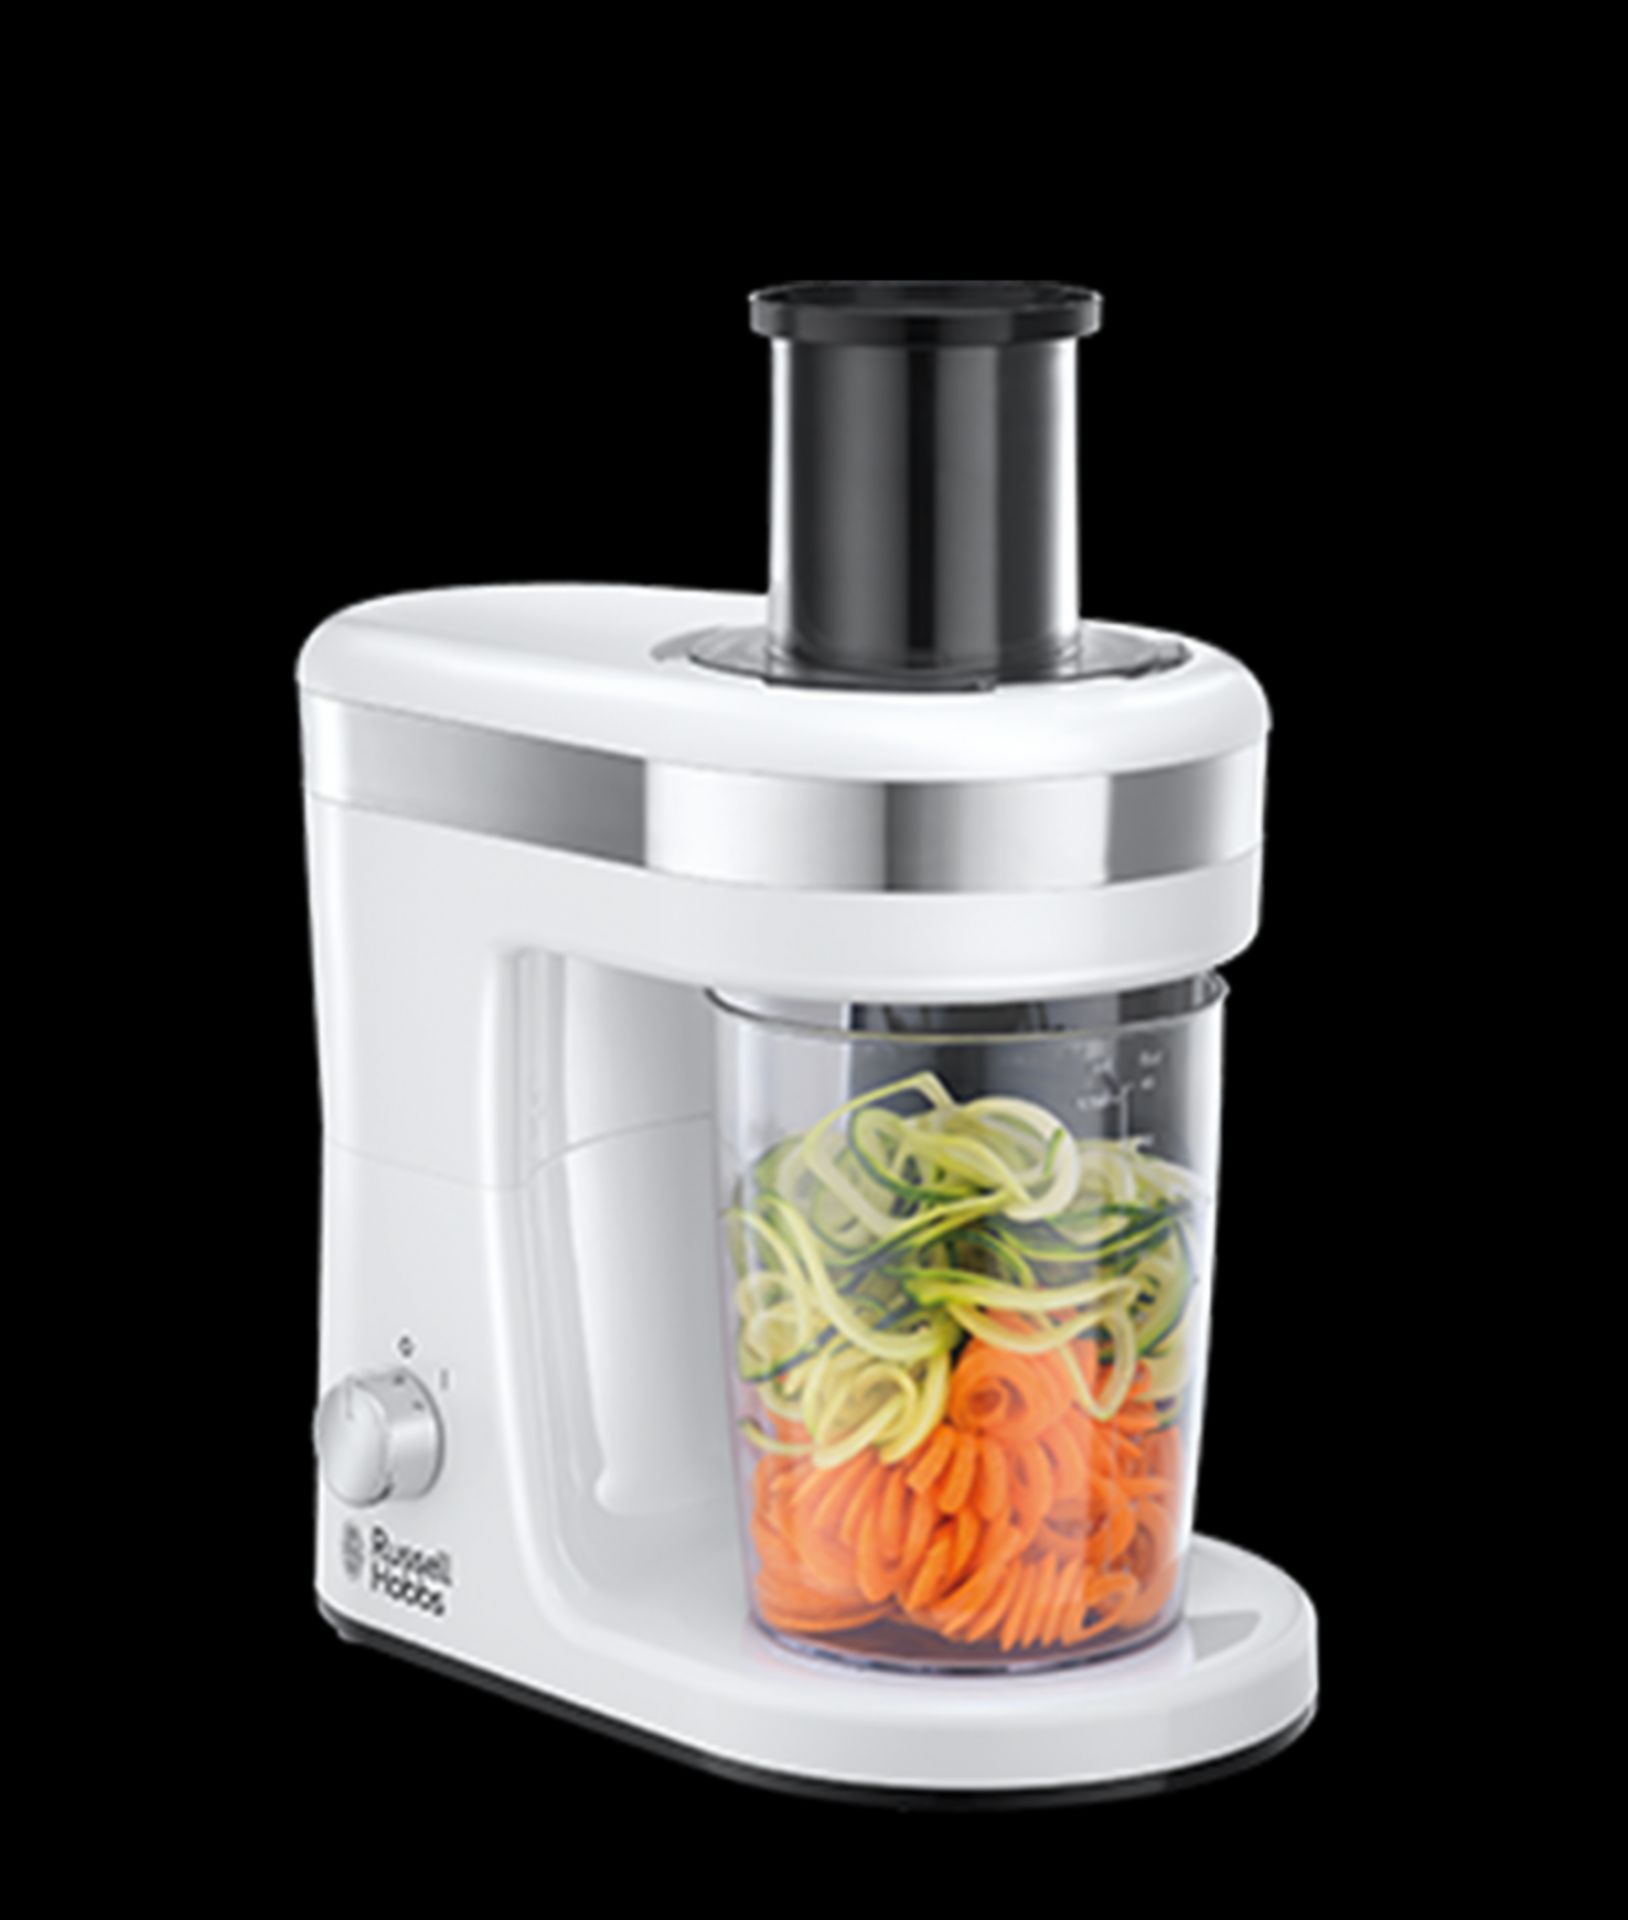 V Brand New Russell Hobbs 300W Ultimate Spiralizer - Cuts into small noodles - large noodles -